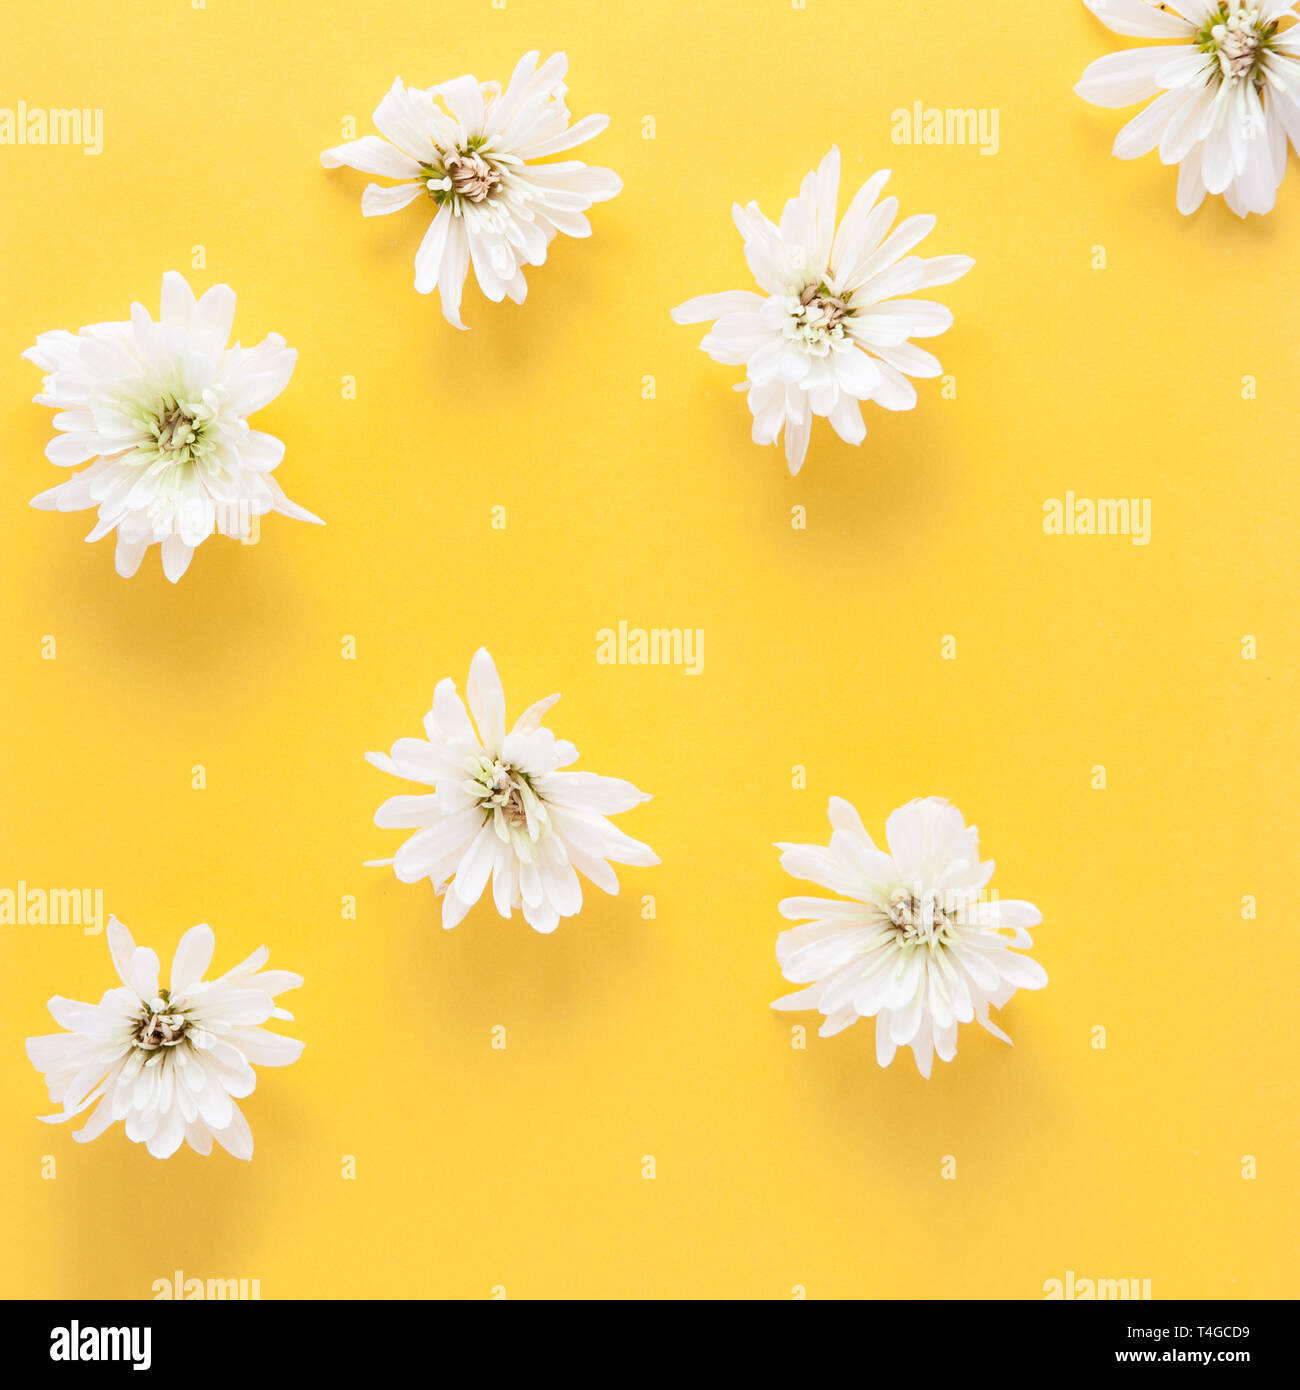 square crop flowers on yellow background Stock Photo